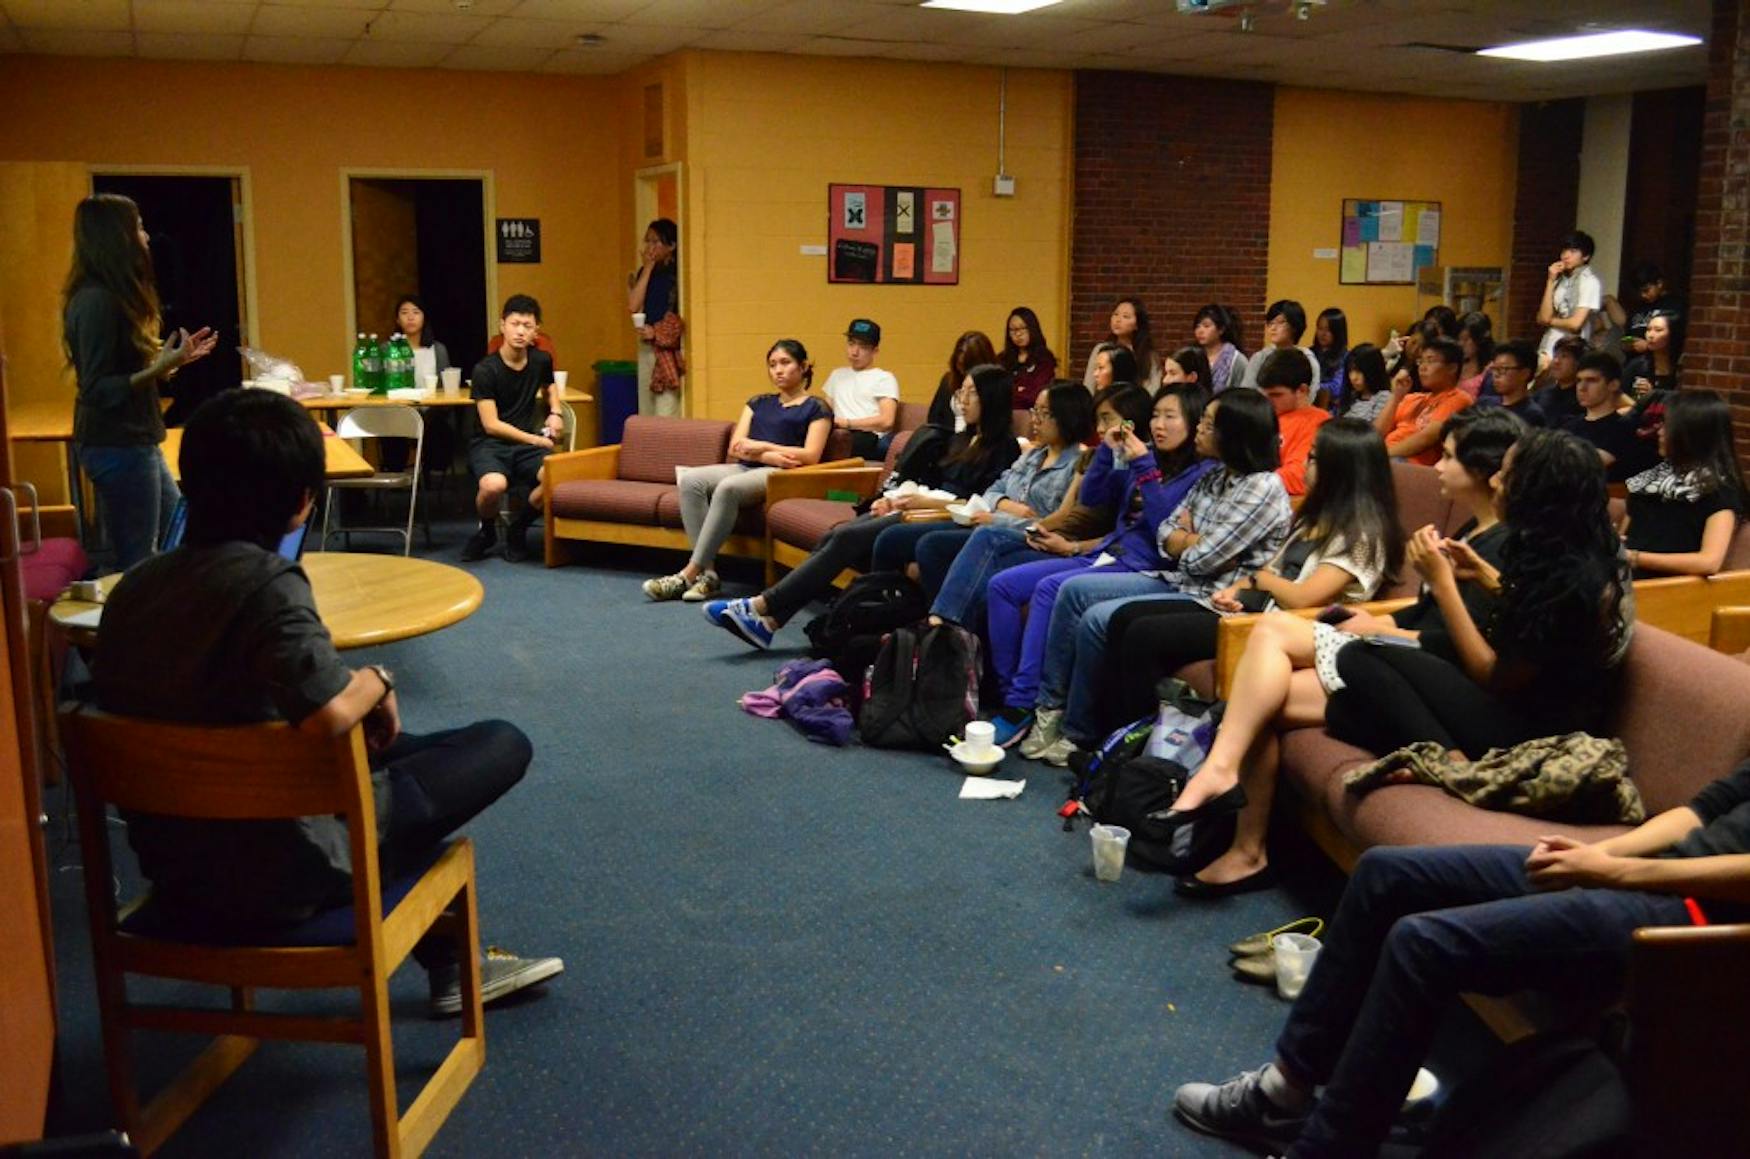 STARTING A CONVERSATION: After a screening of the film, the Brandeis Asian American Student Association led a discussion with the audience in which they debriefed about the film. After the discussion, the club provided kimchi rice for attendants.